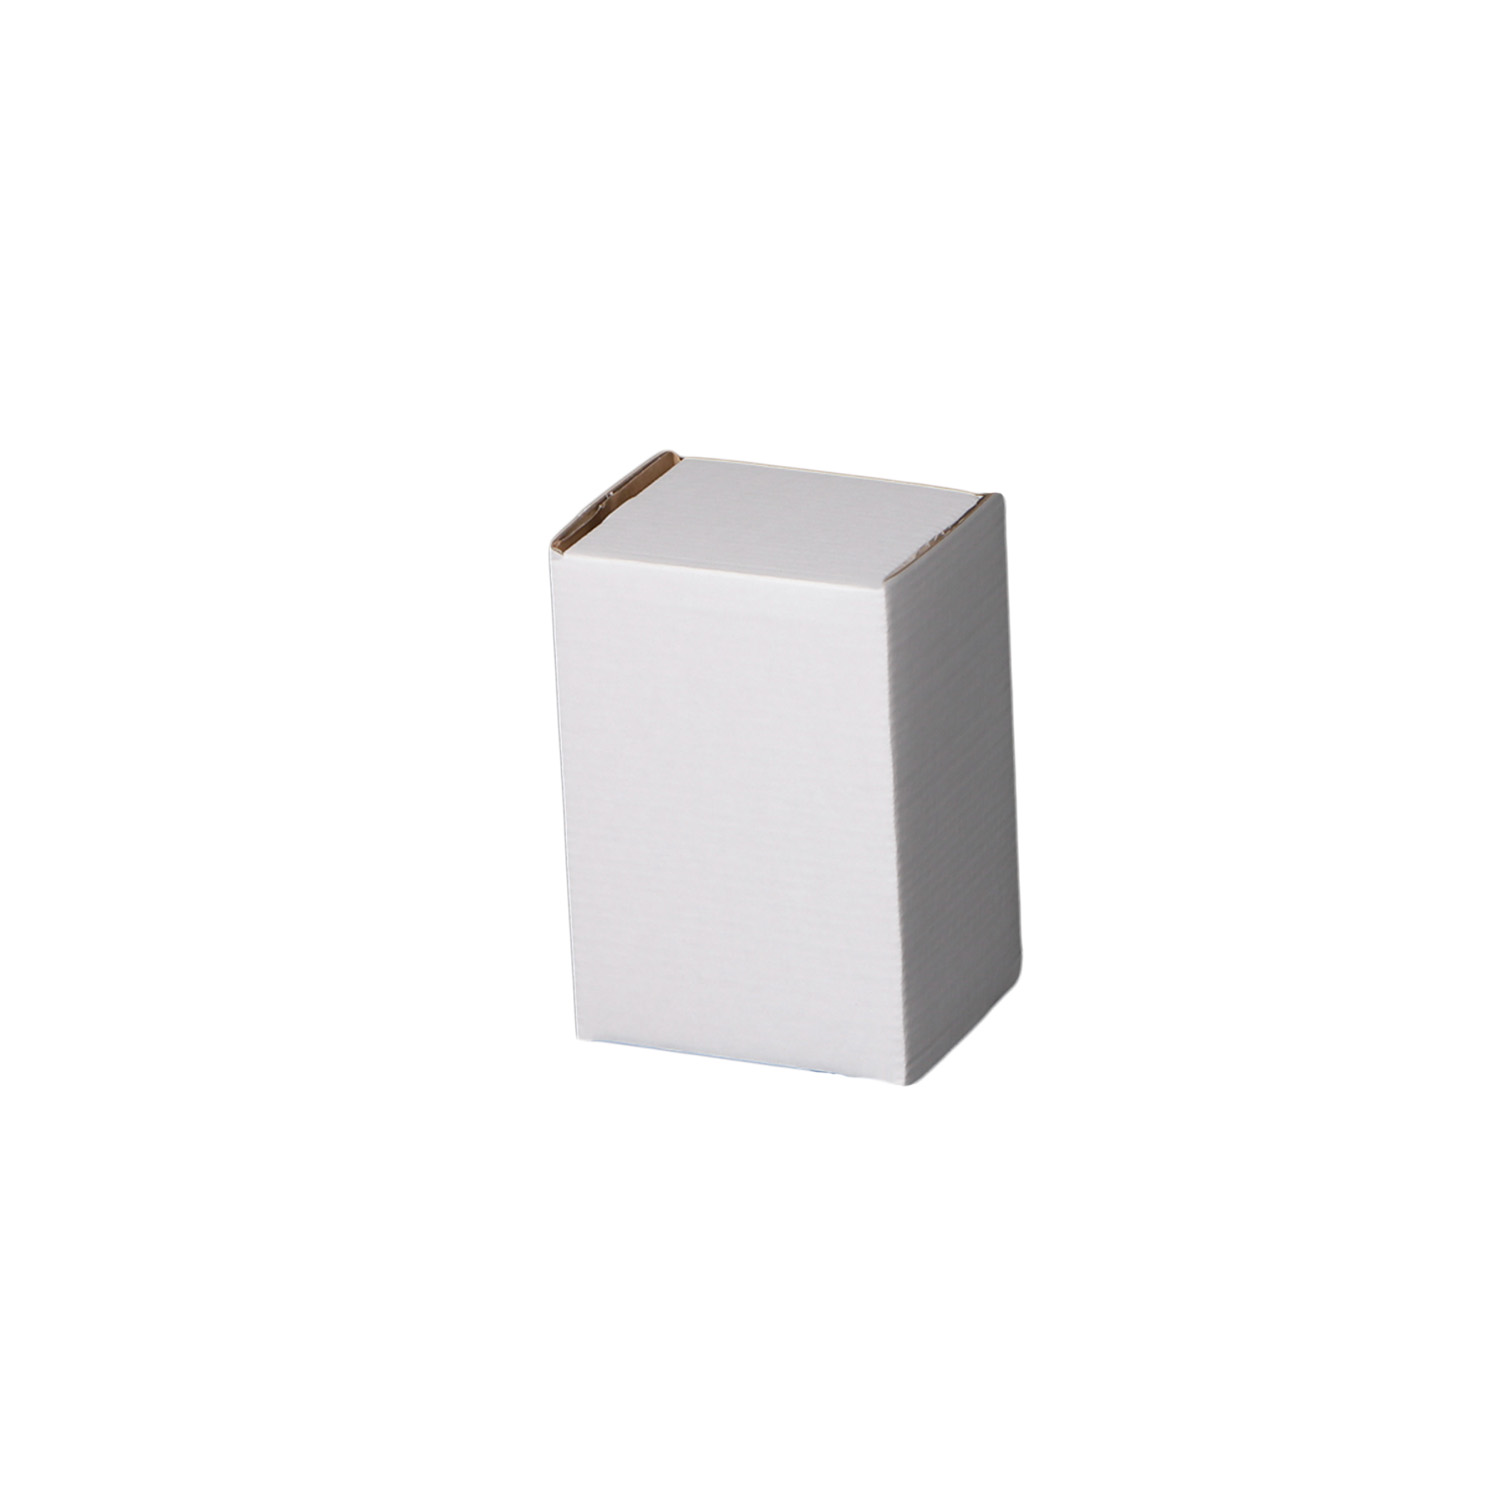 Small postal boxes | eco friendly cardboard boxes